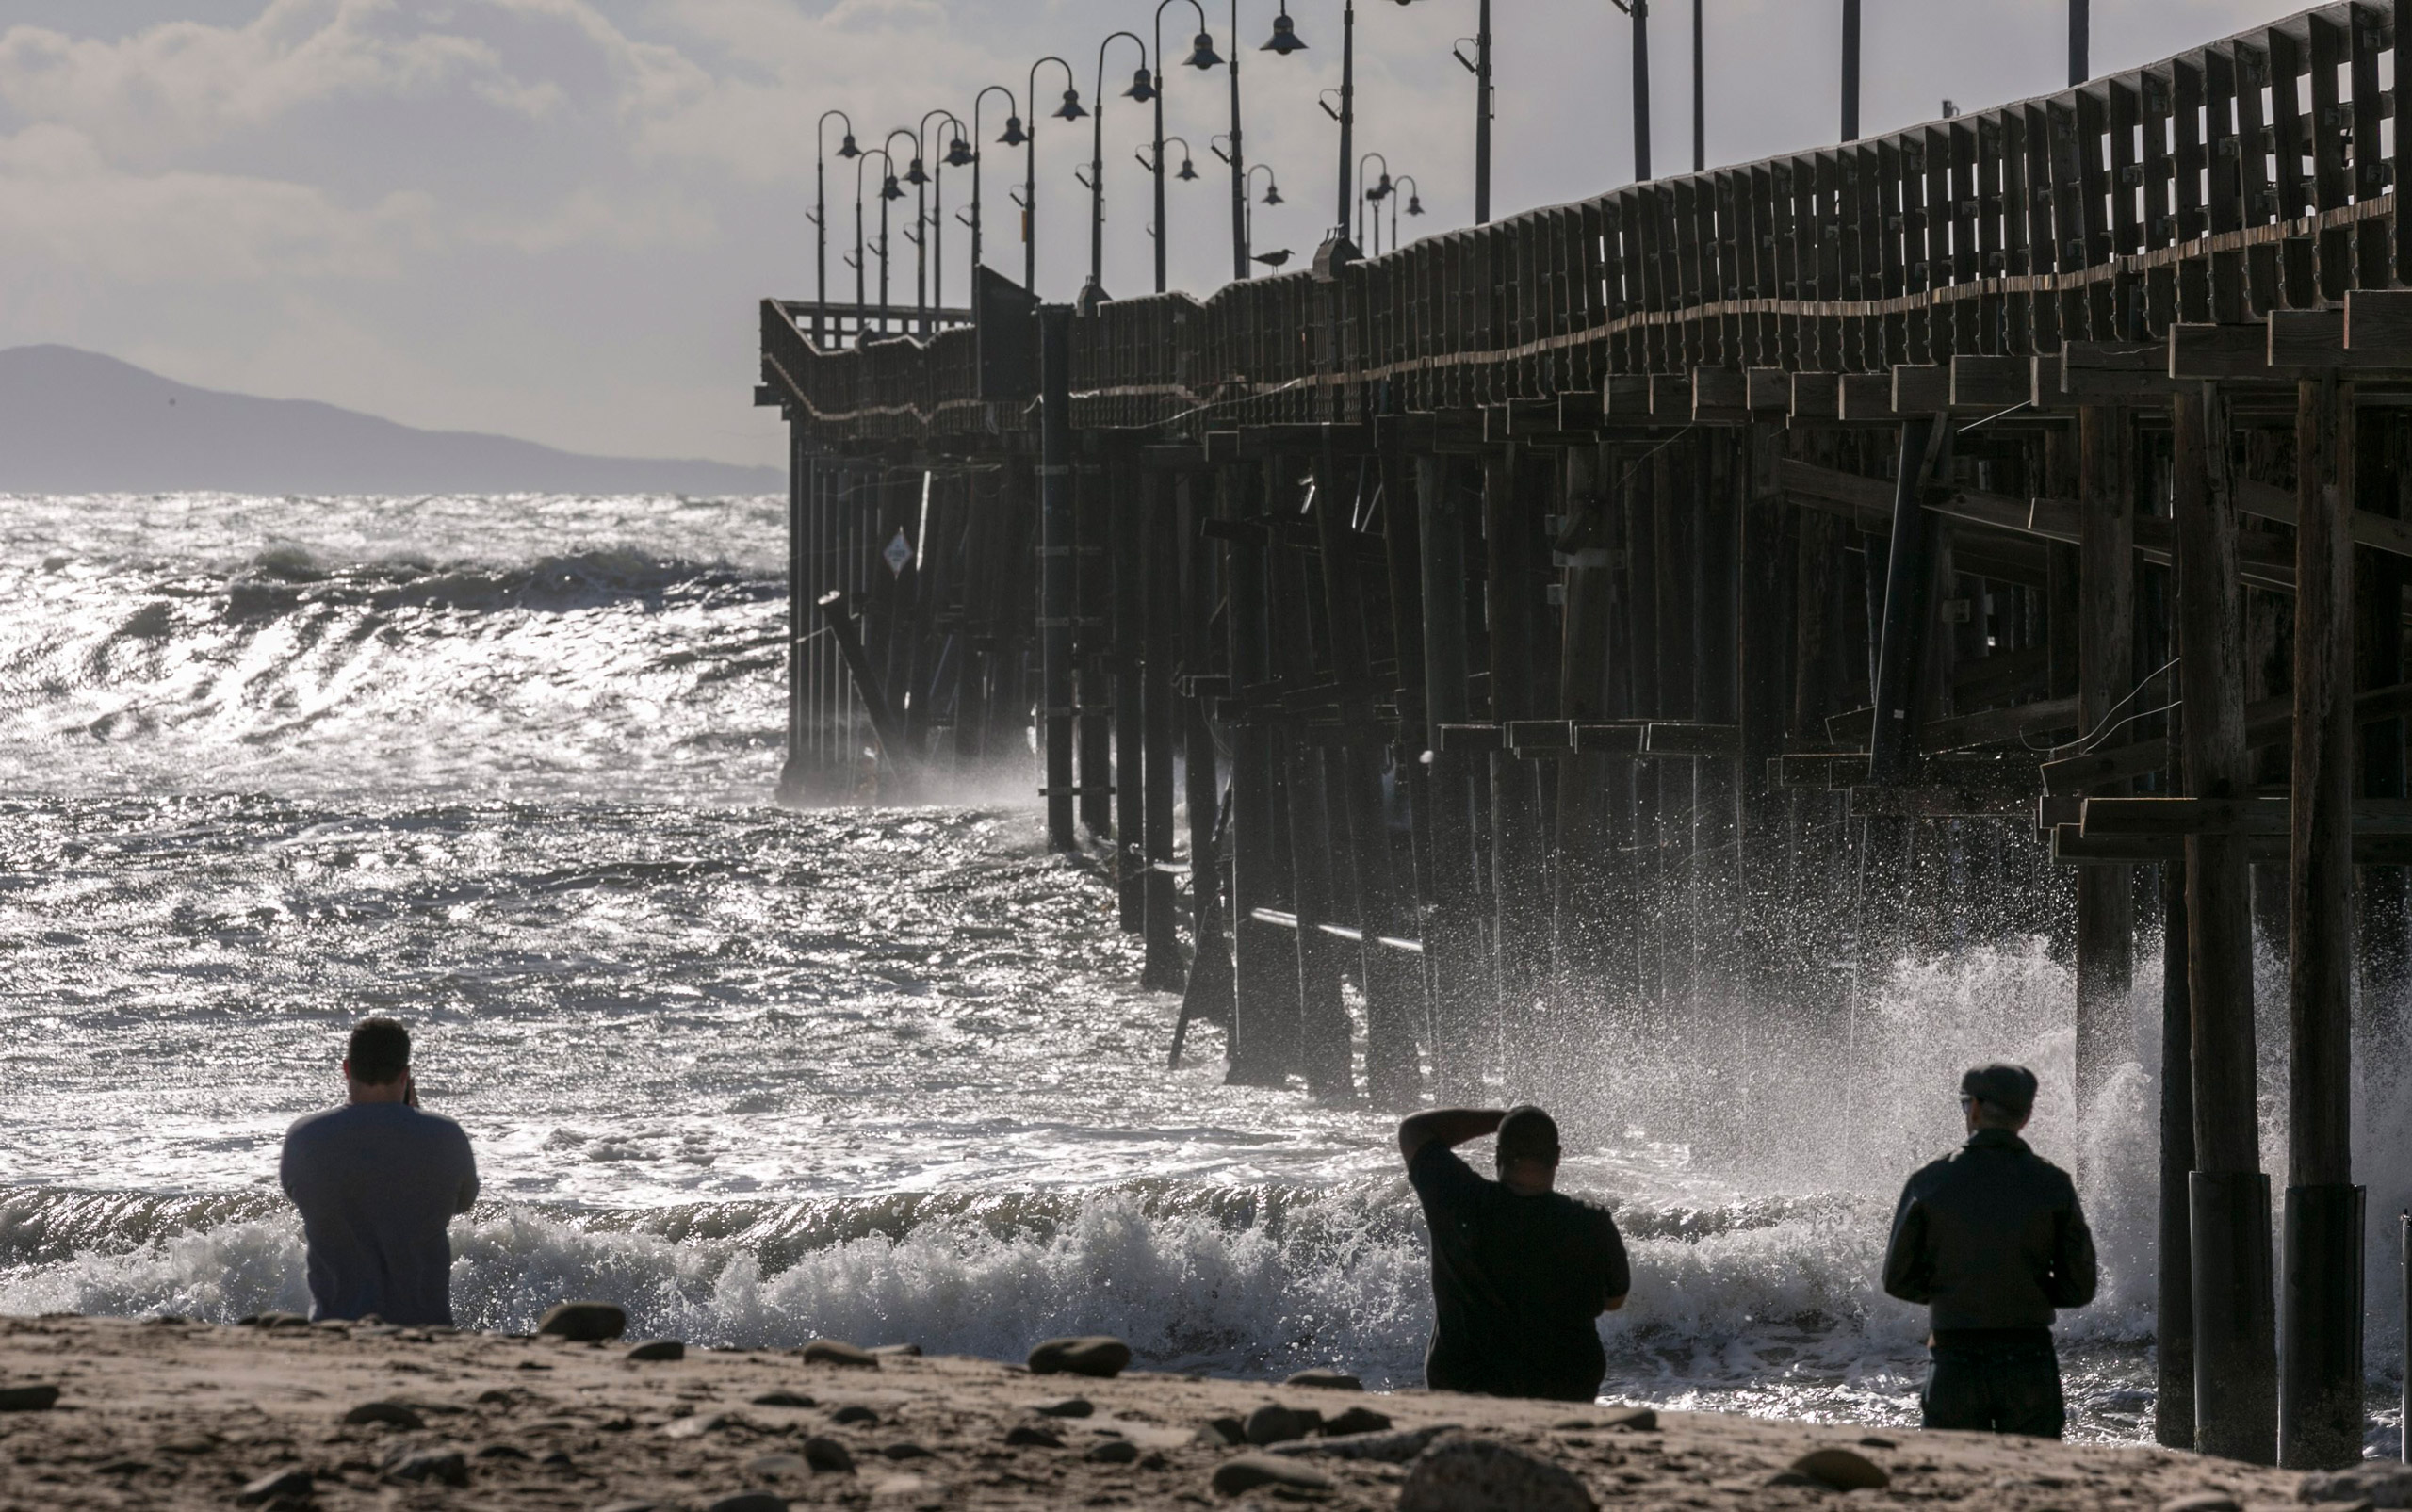 Rough seas surge over the Ventura Pier in Ventura, Calif., on Friday, Dec. 11, 2015. Surging waves inundated several low-lying streets along the coast as a very large Pacific swell hit Friday. (AP Photo/Damian Dovarganes)